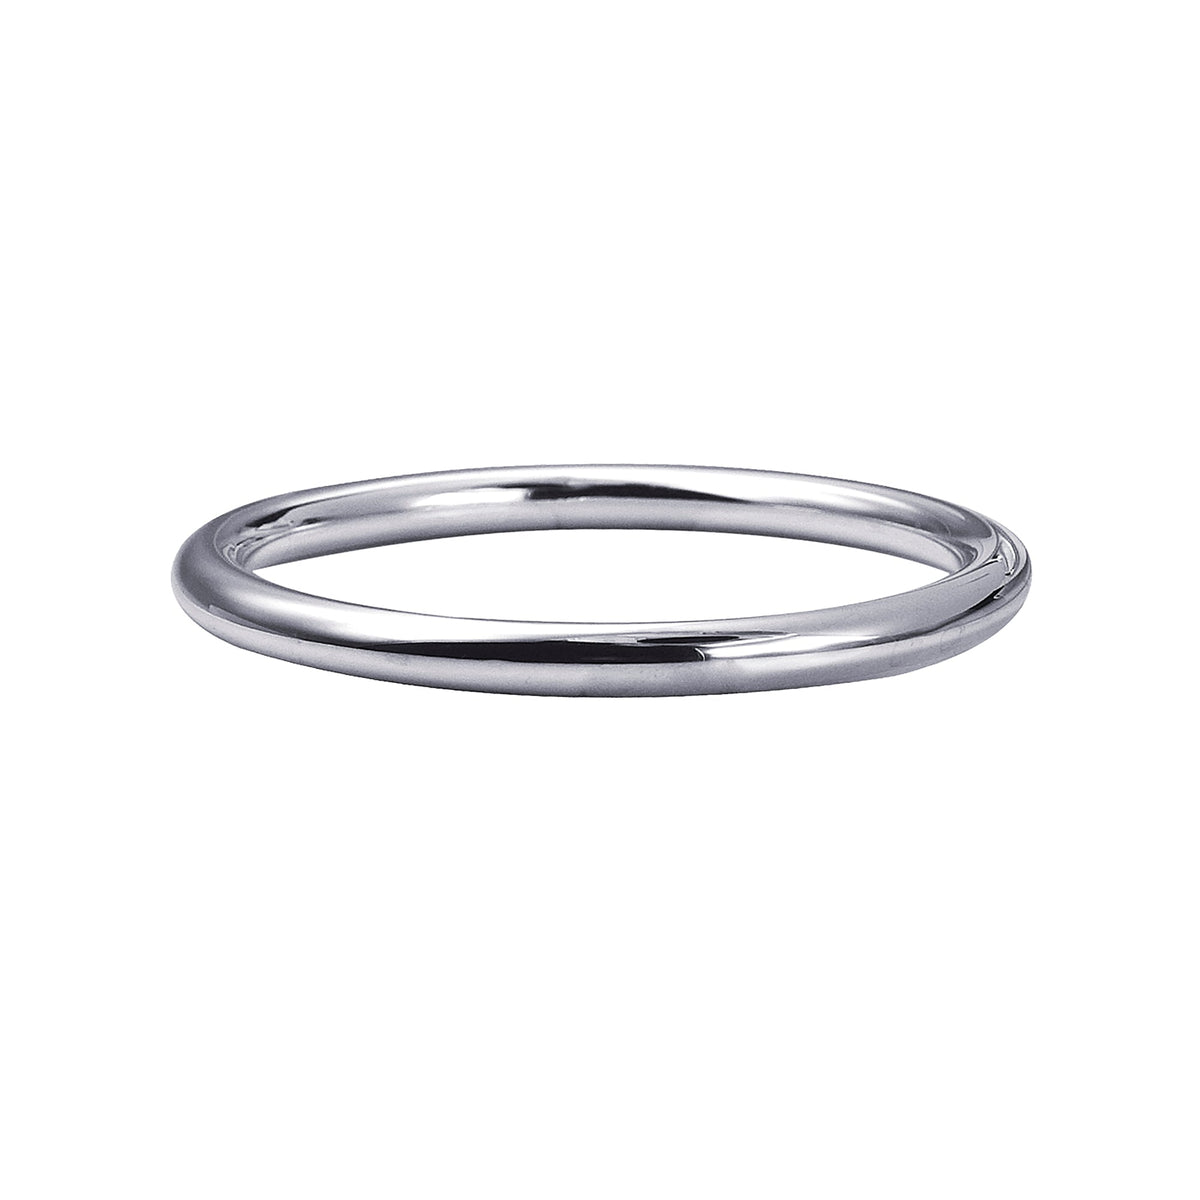 Solid Silver 6mm Wide Round Bangle - Markbridge Jewellers